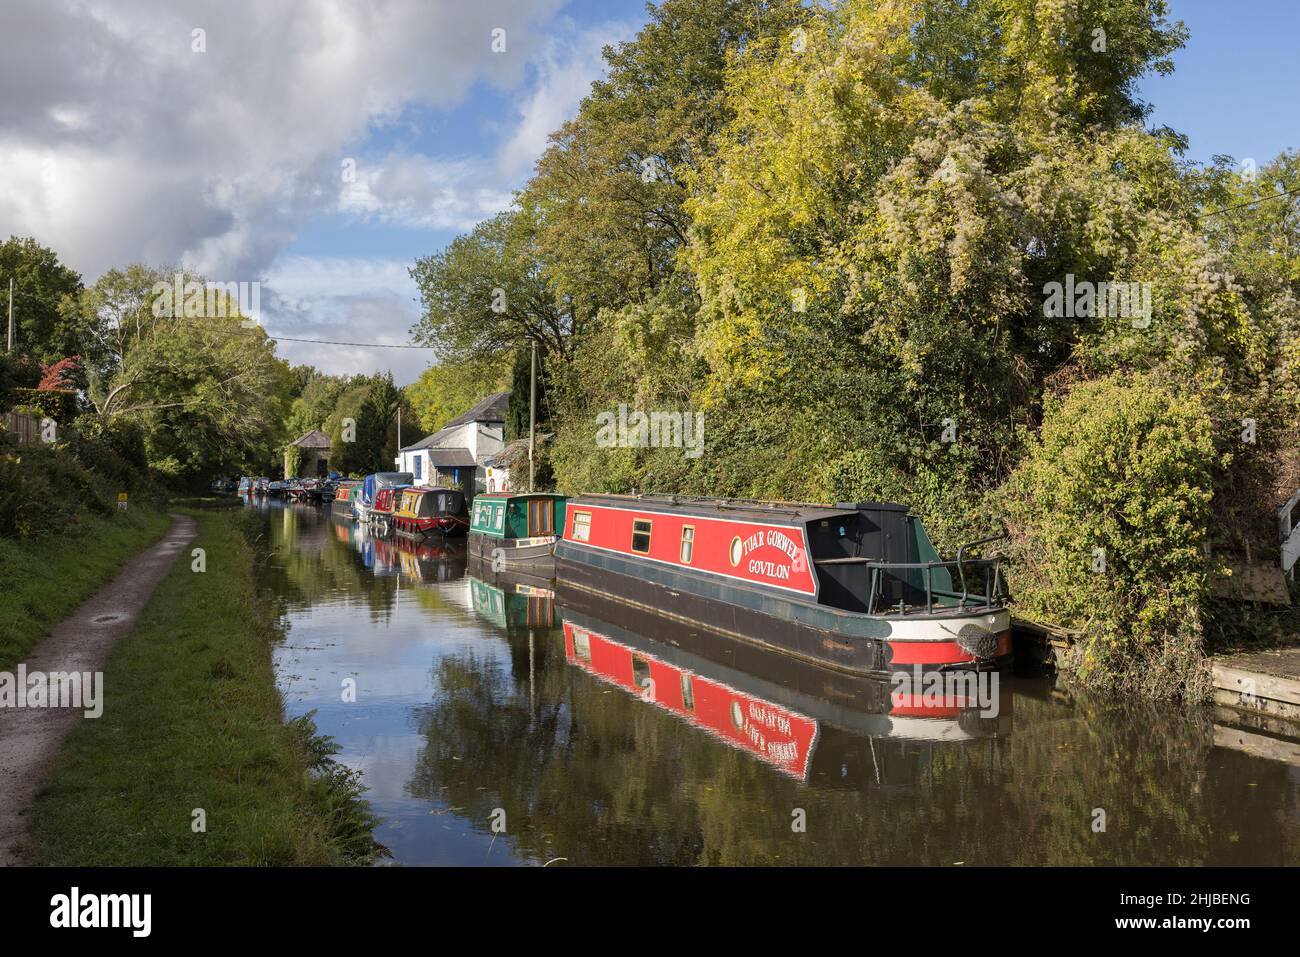 Moored boats on the Brecon and Monmouthshire canal at Govilon, Wales, UK Stock Photo